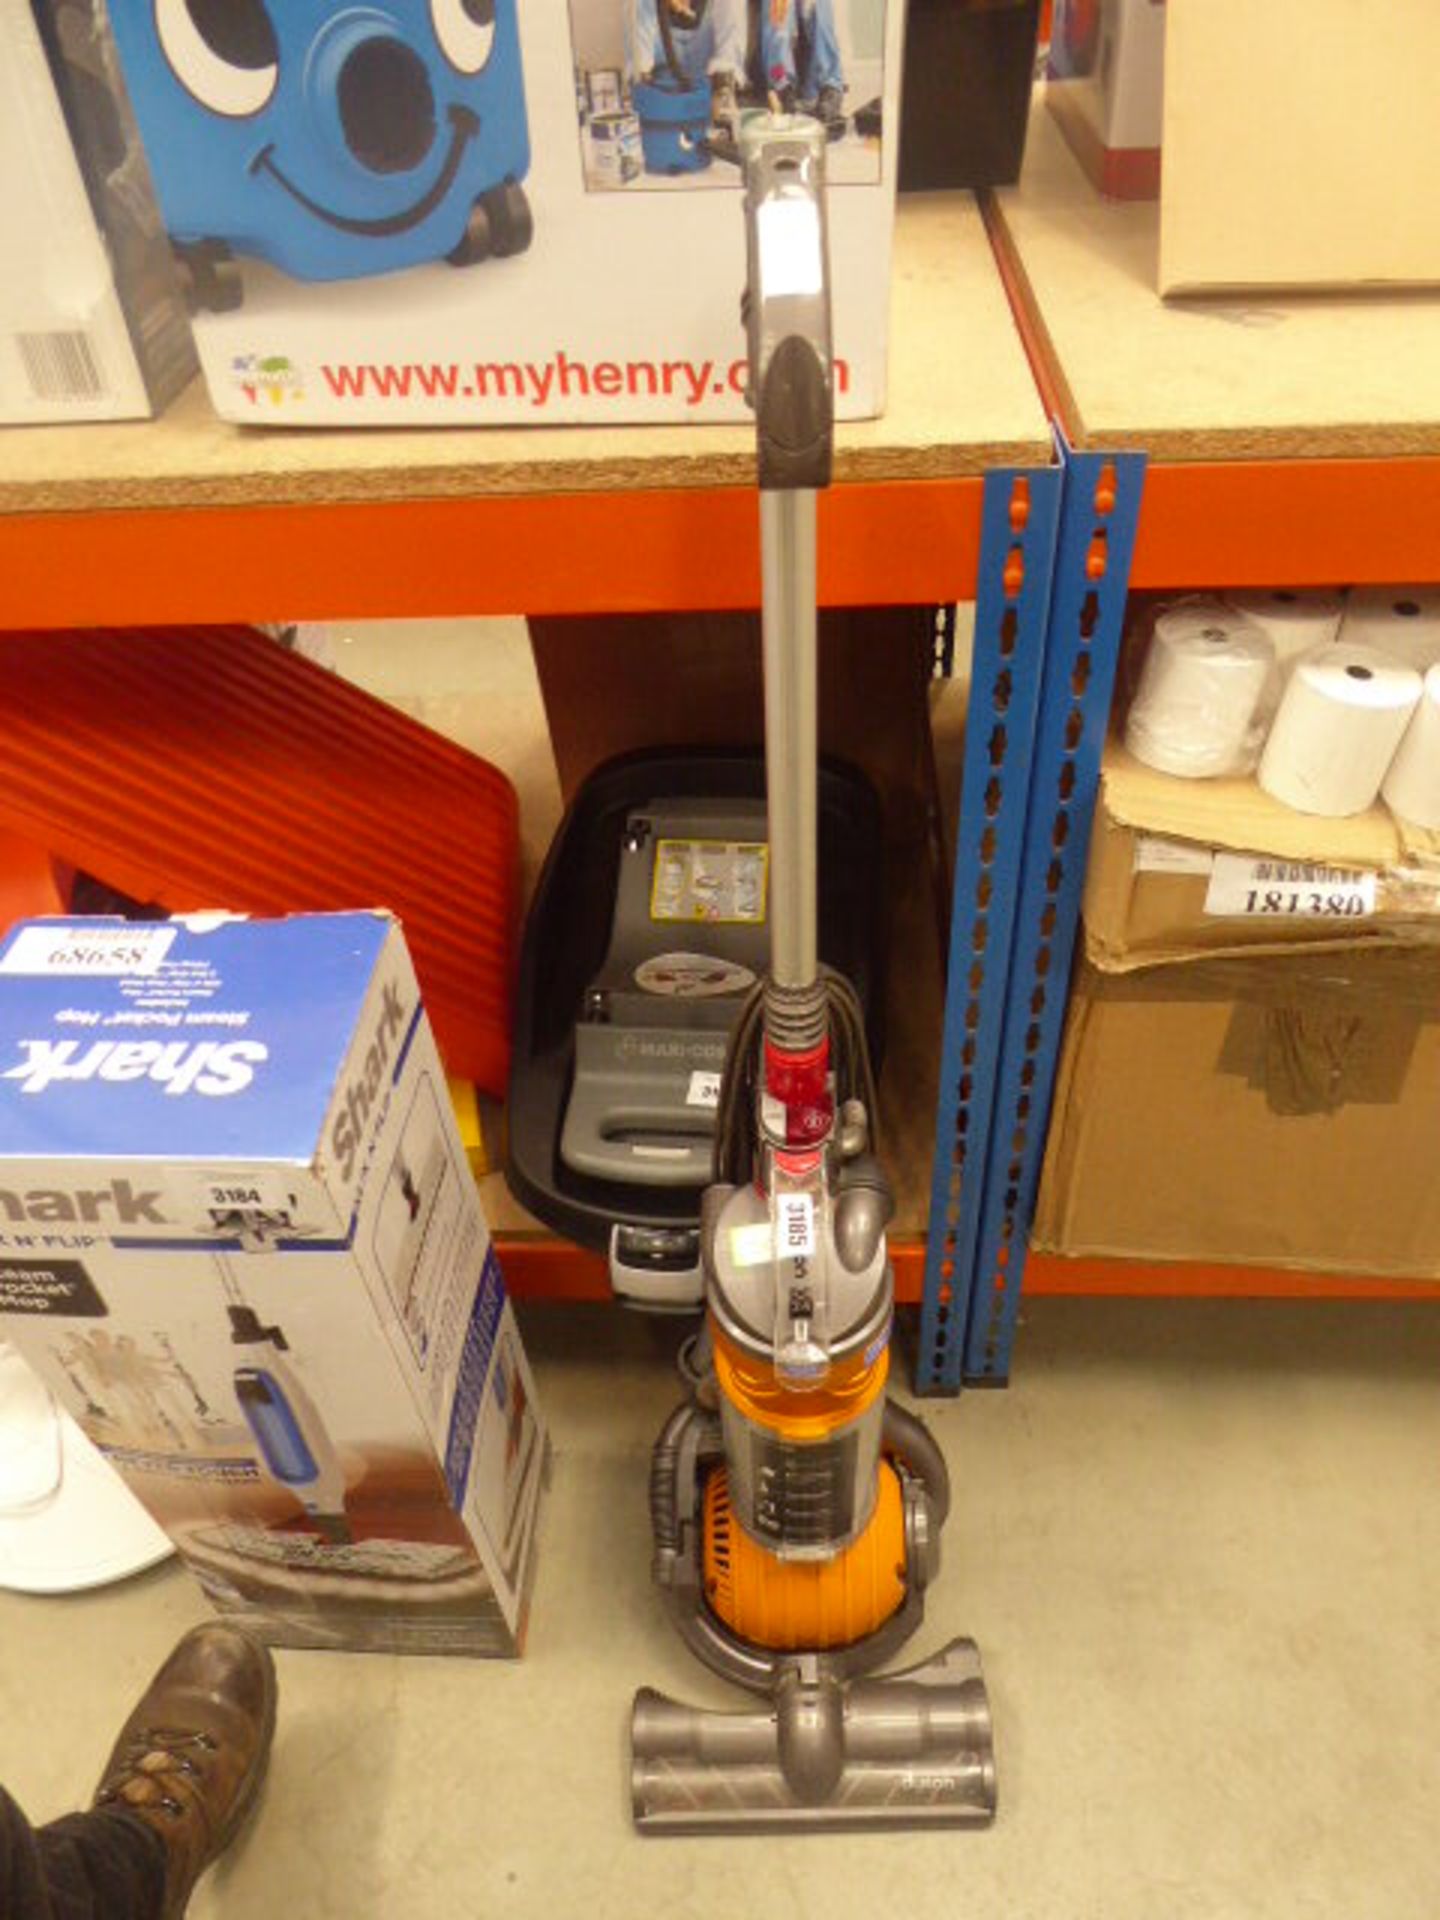 (TN105) Dyson upright DC24 vacuum cleaner